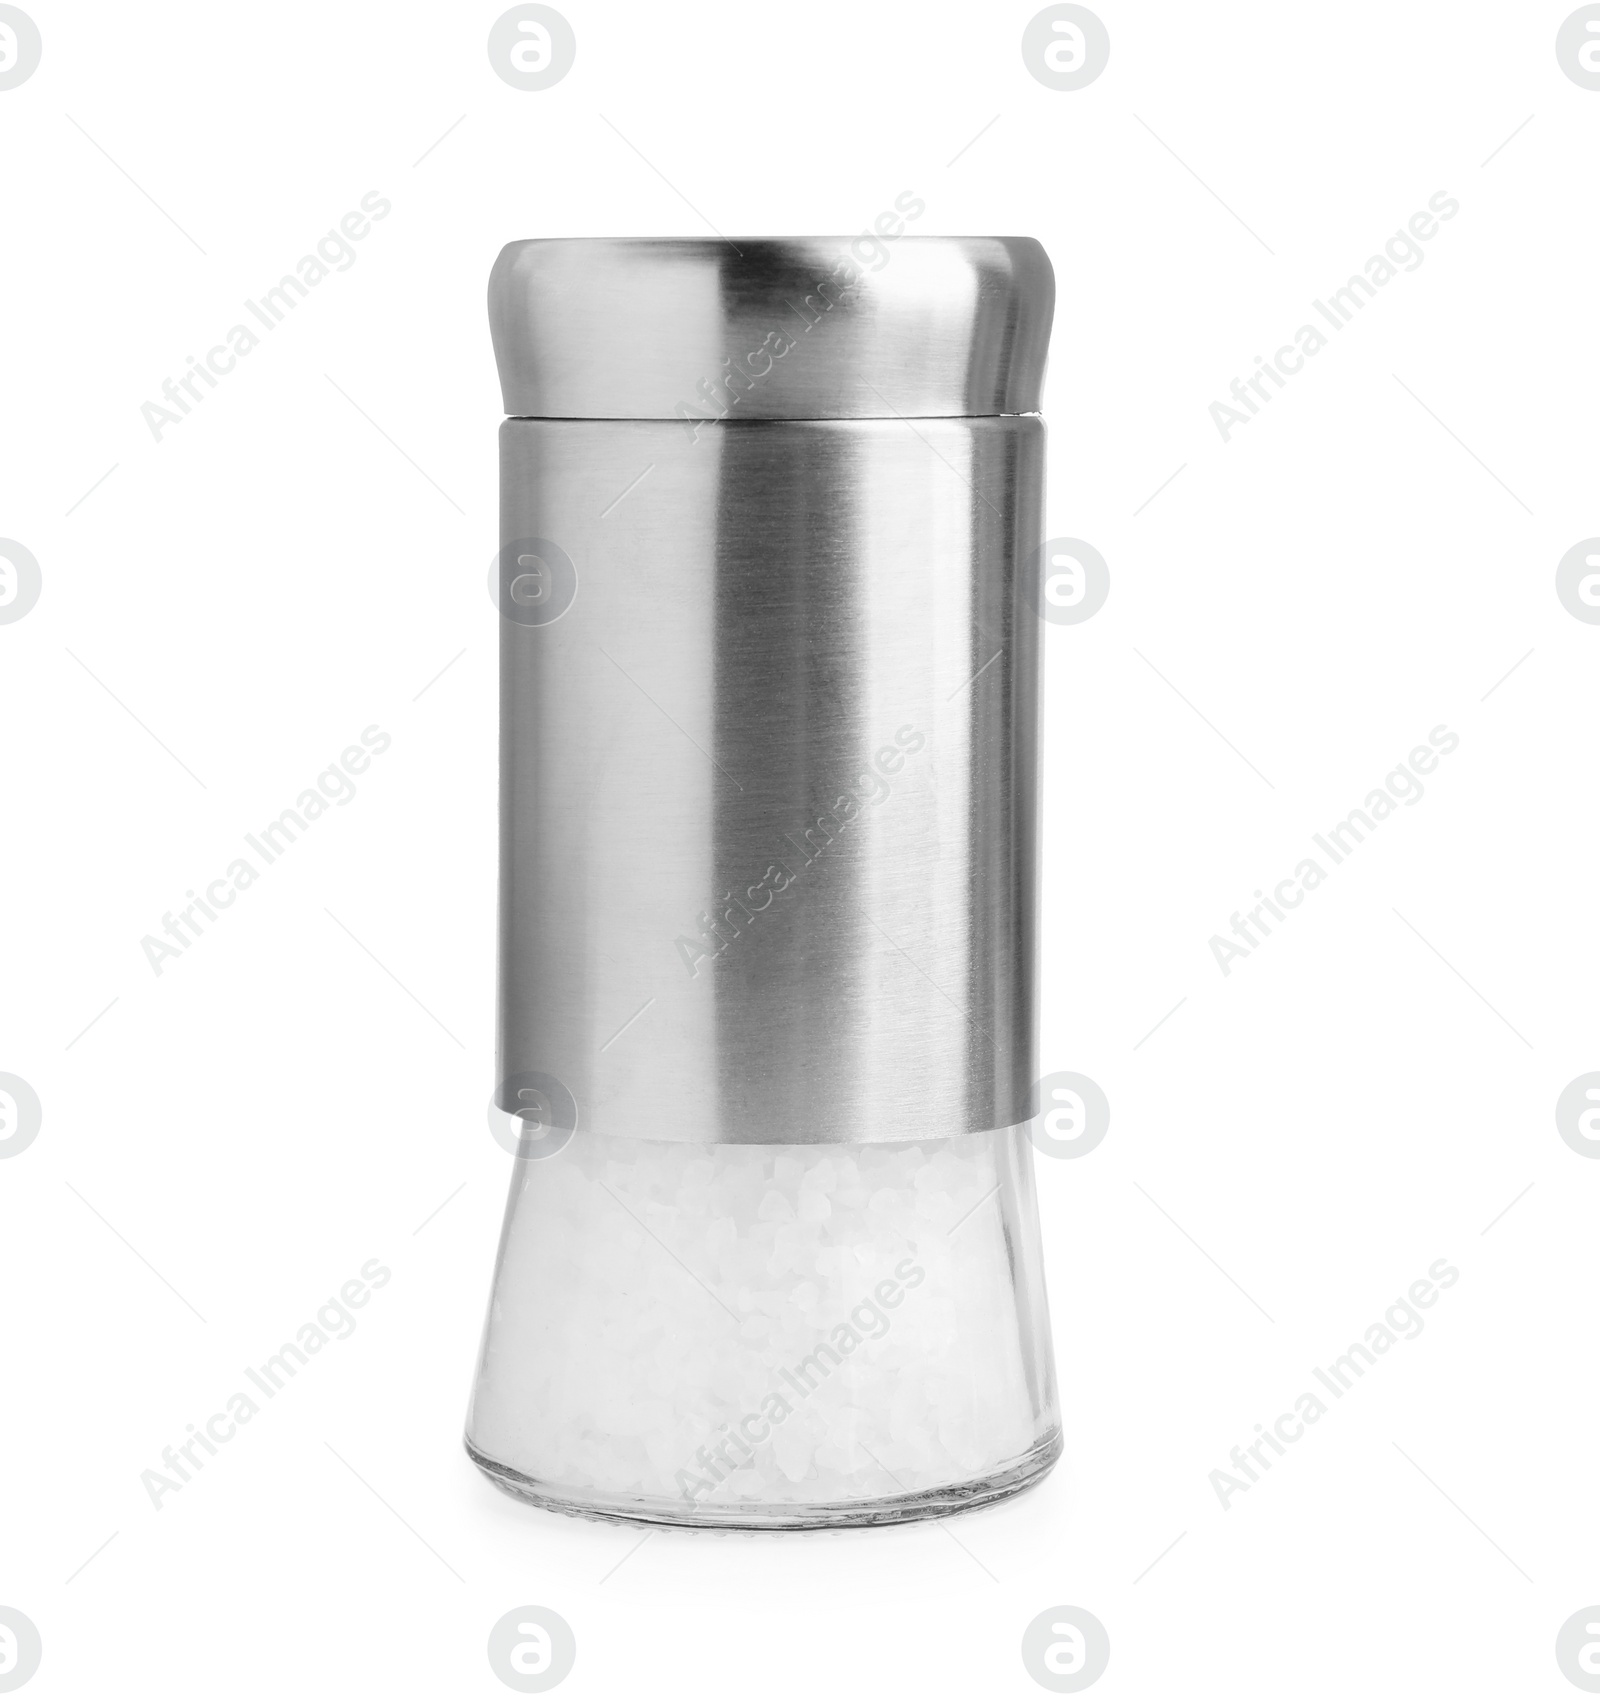 Photo of One shaker with salt isolated on white